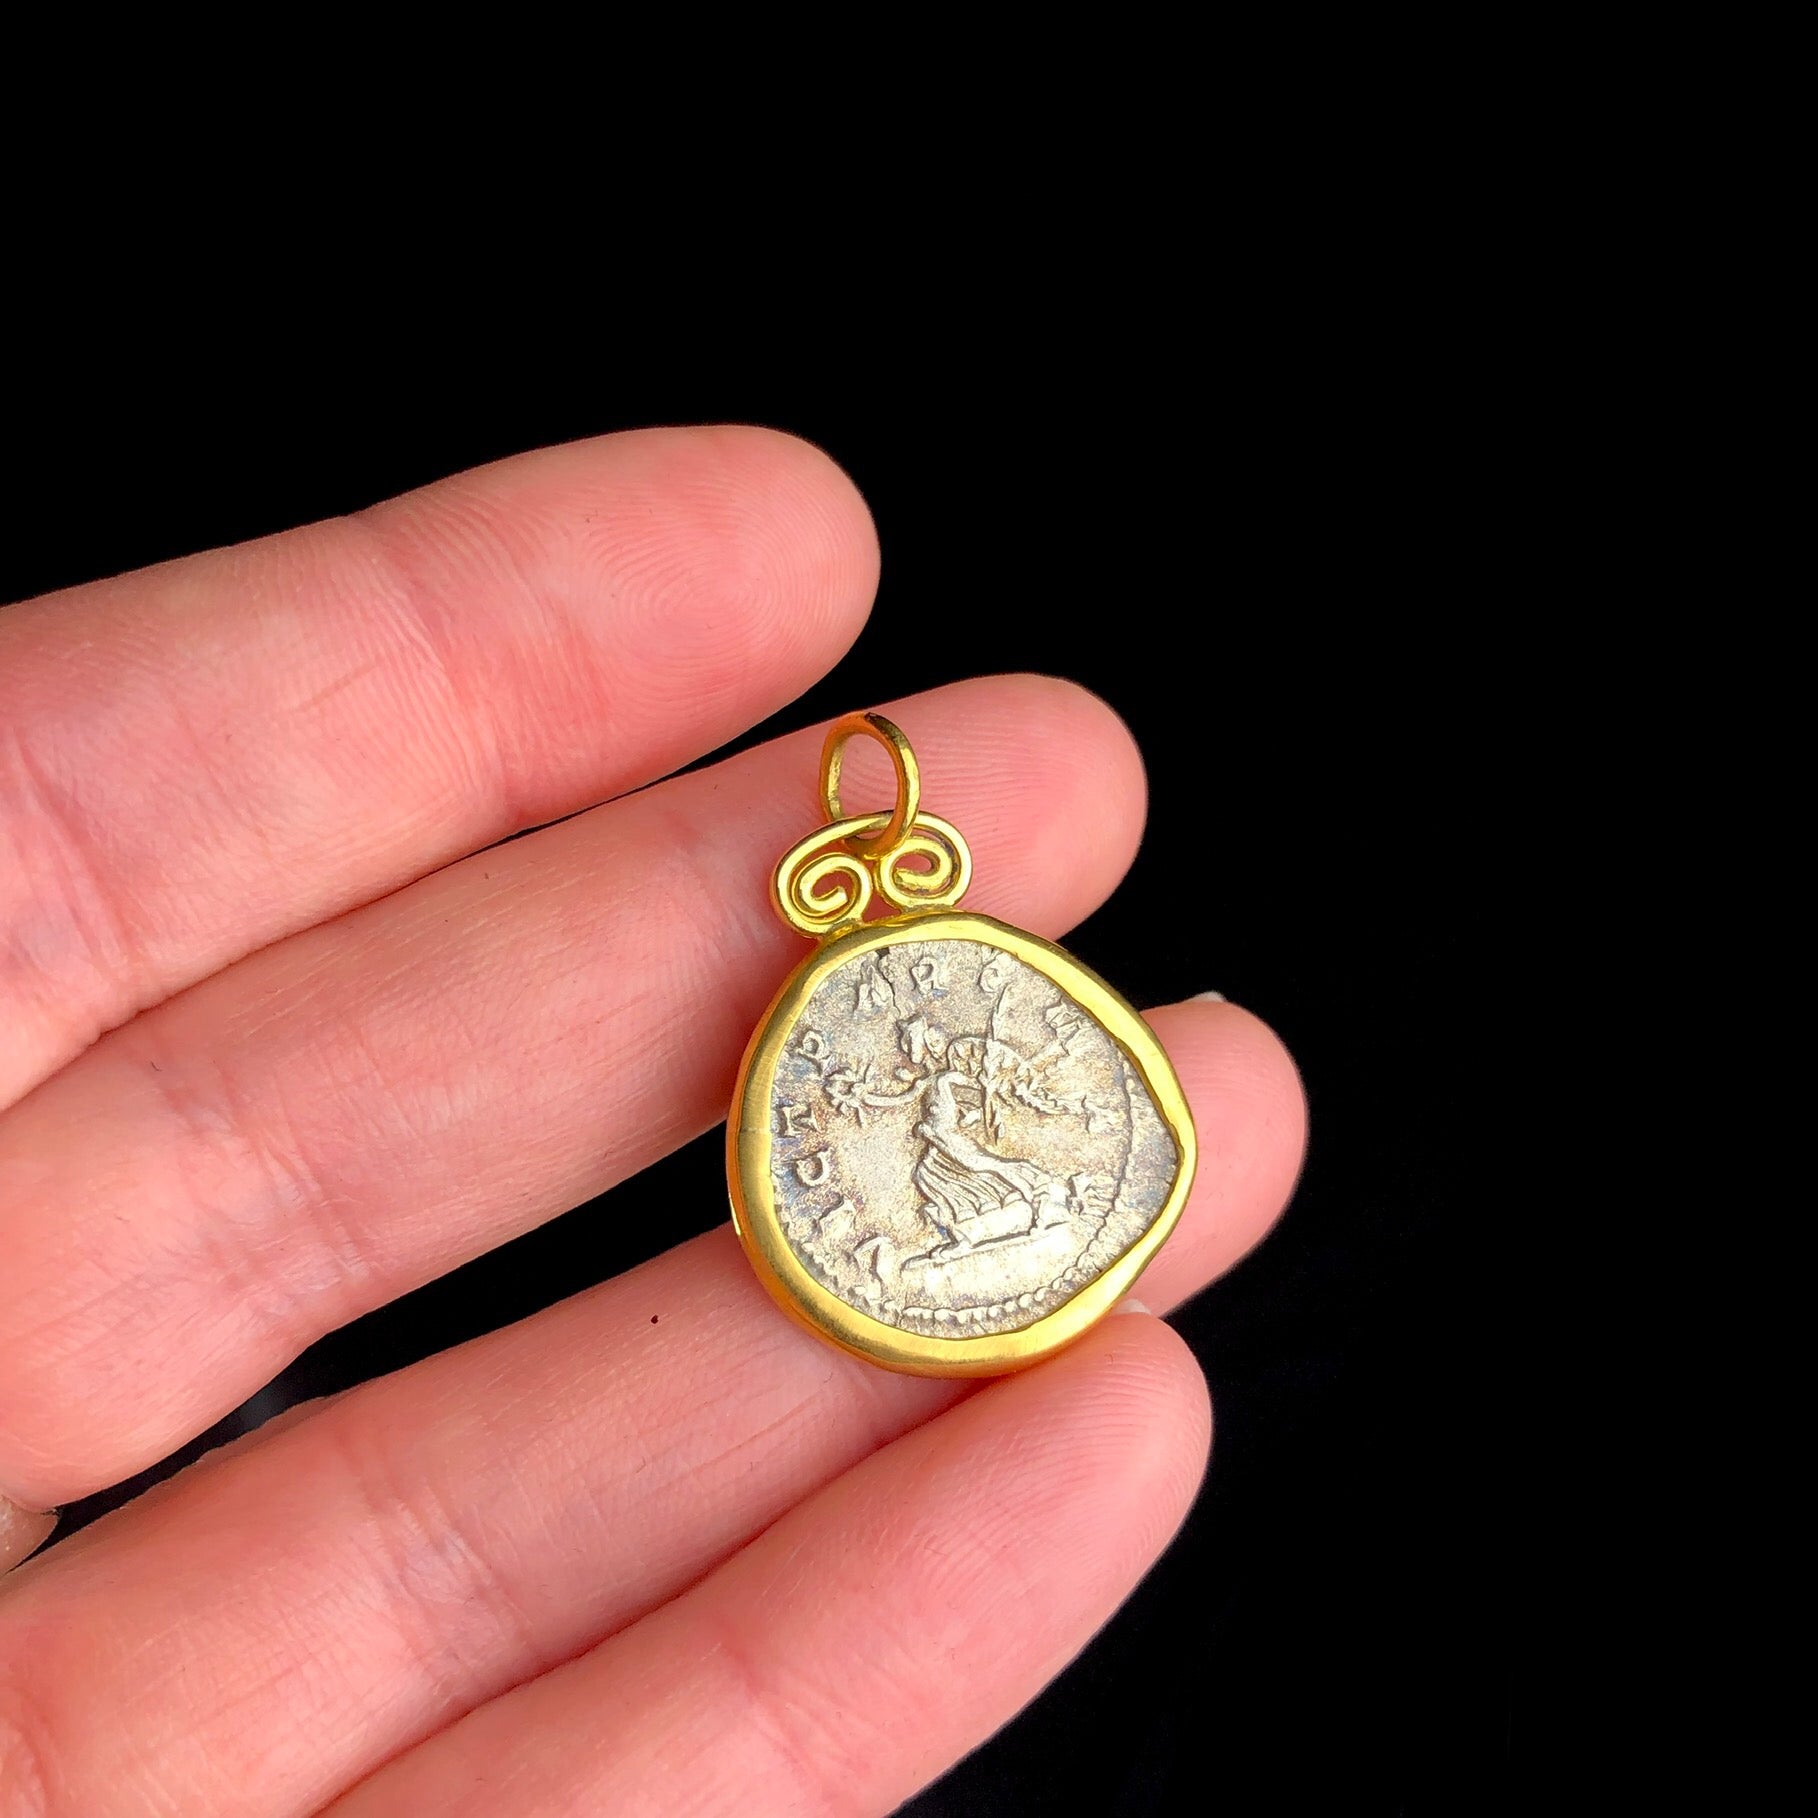 Ancient Coin of Victory Pendent shown in hand